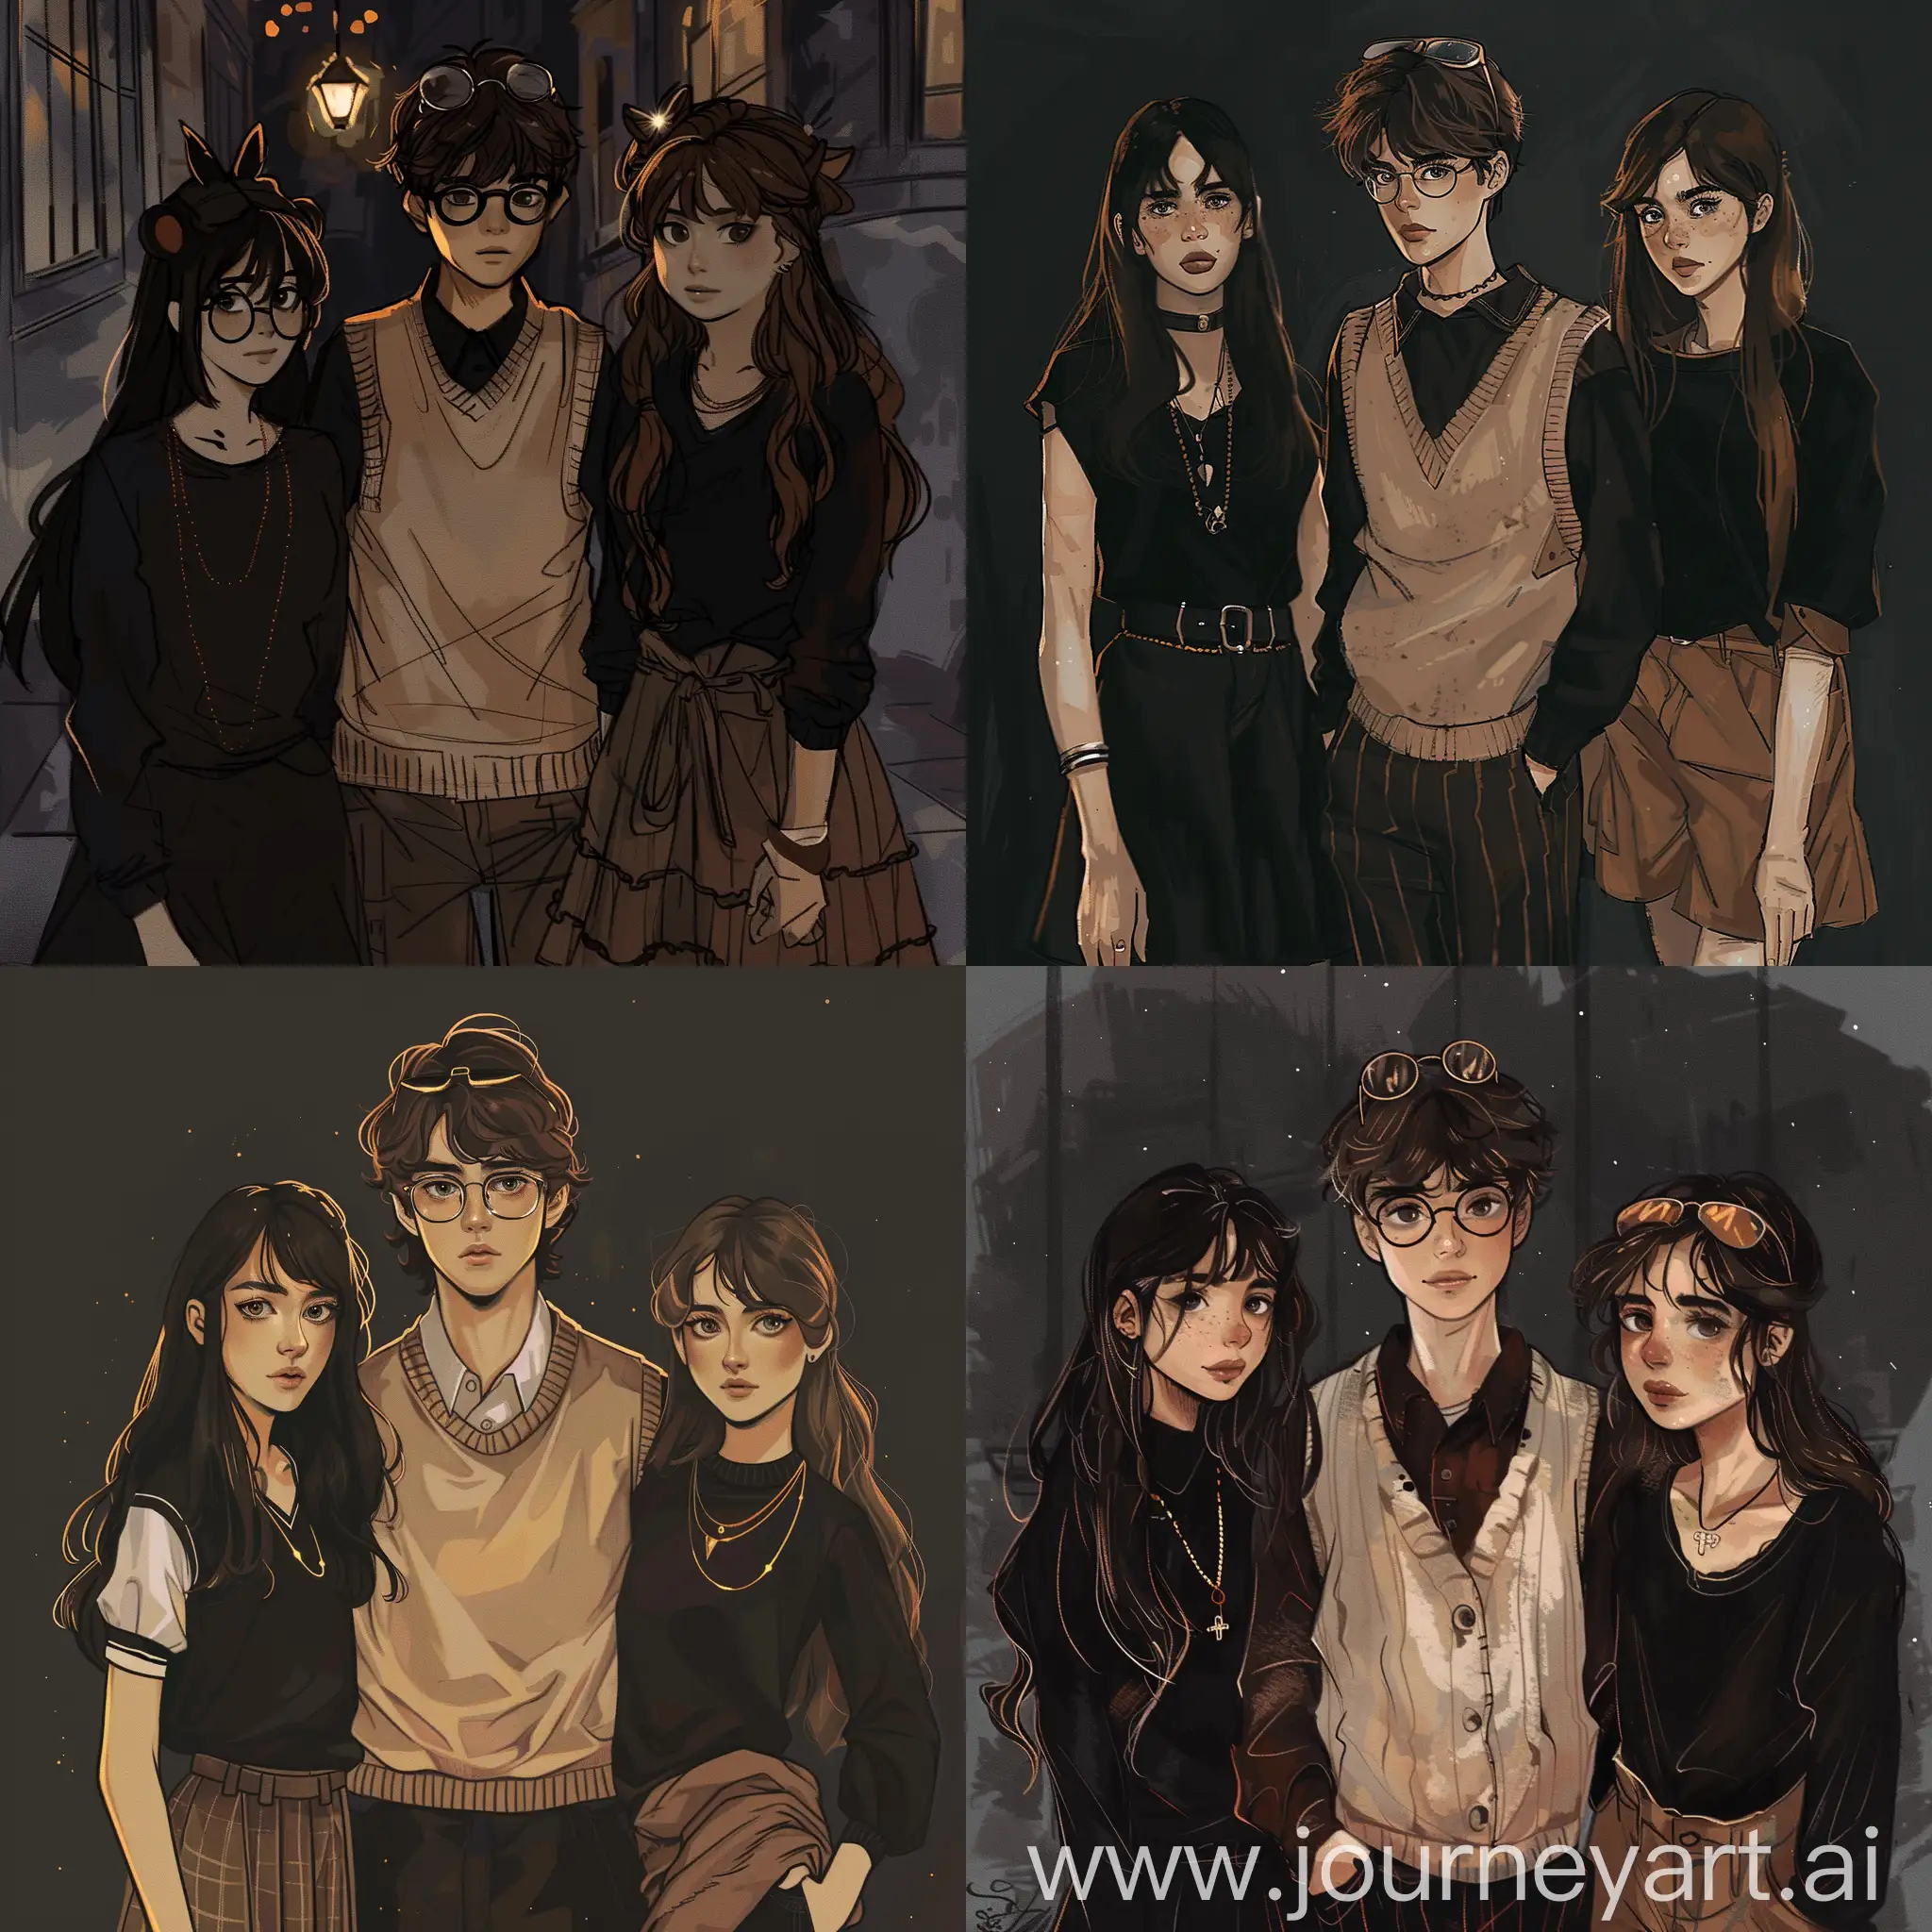 three teenagers, one boy in the middle with brown hair and glasses on his head with brown beige sweater vest, one girl with long dark hair and black outfit, and another girl with short brown hair with comfy clothes, night theme, dark, drawing, sketches, teenagers